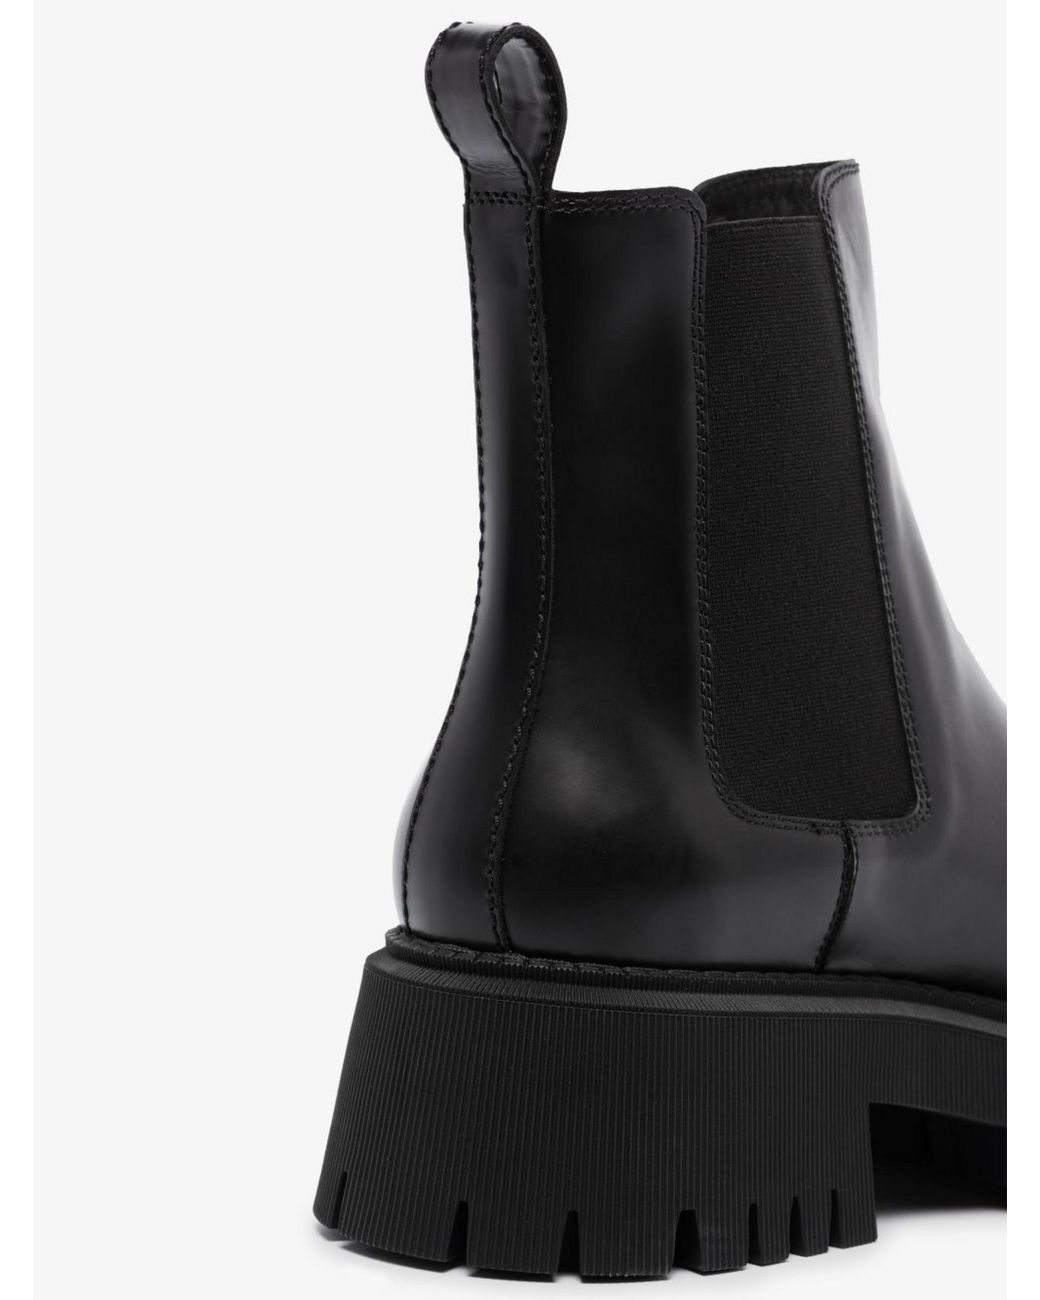 Balenciaga Leather Tractor Chelsea Boots in Black for Men - Lyst